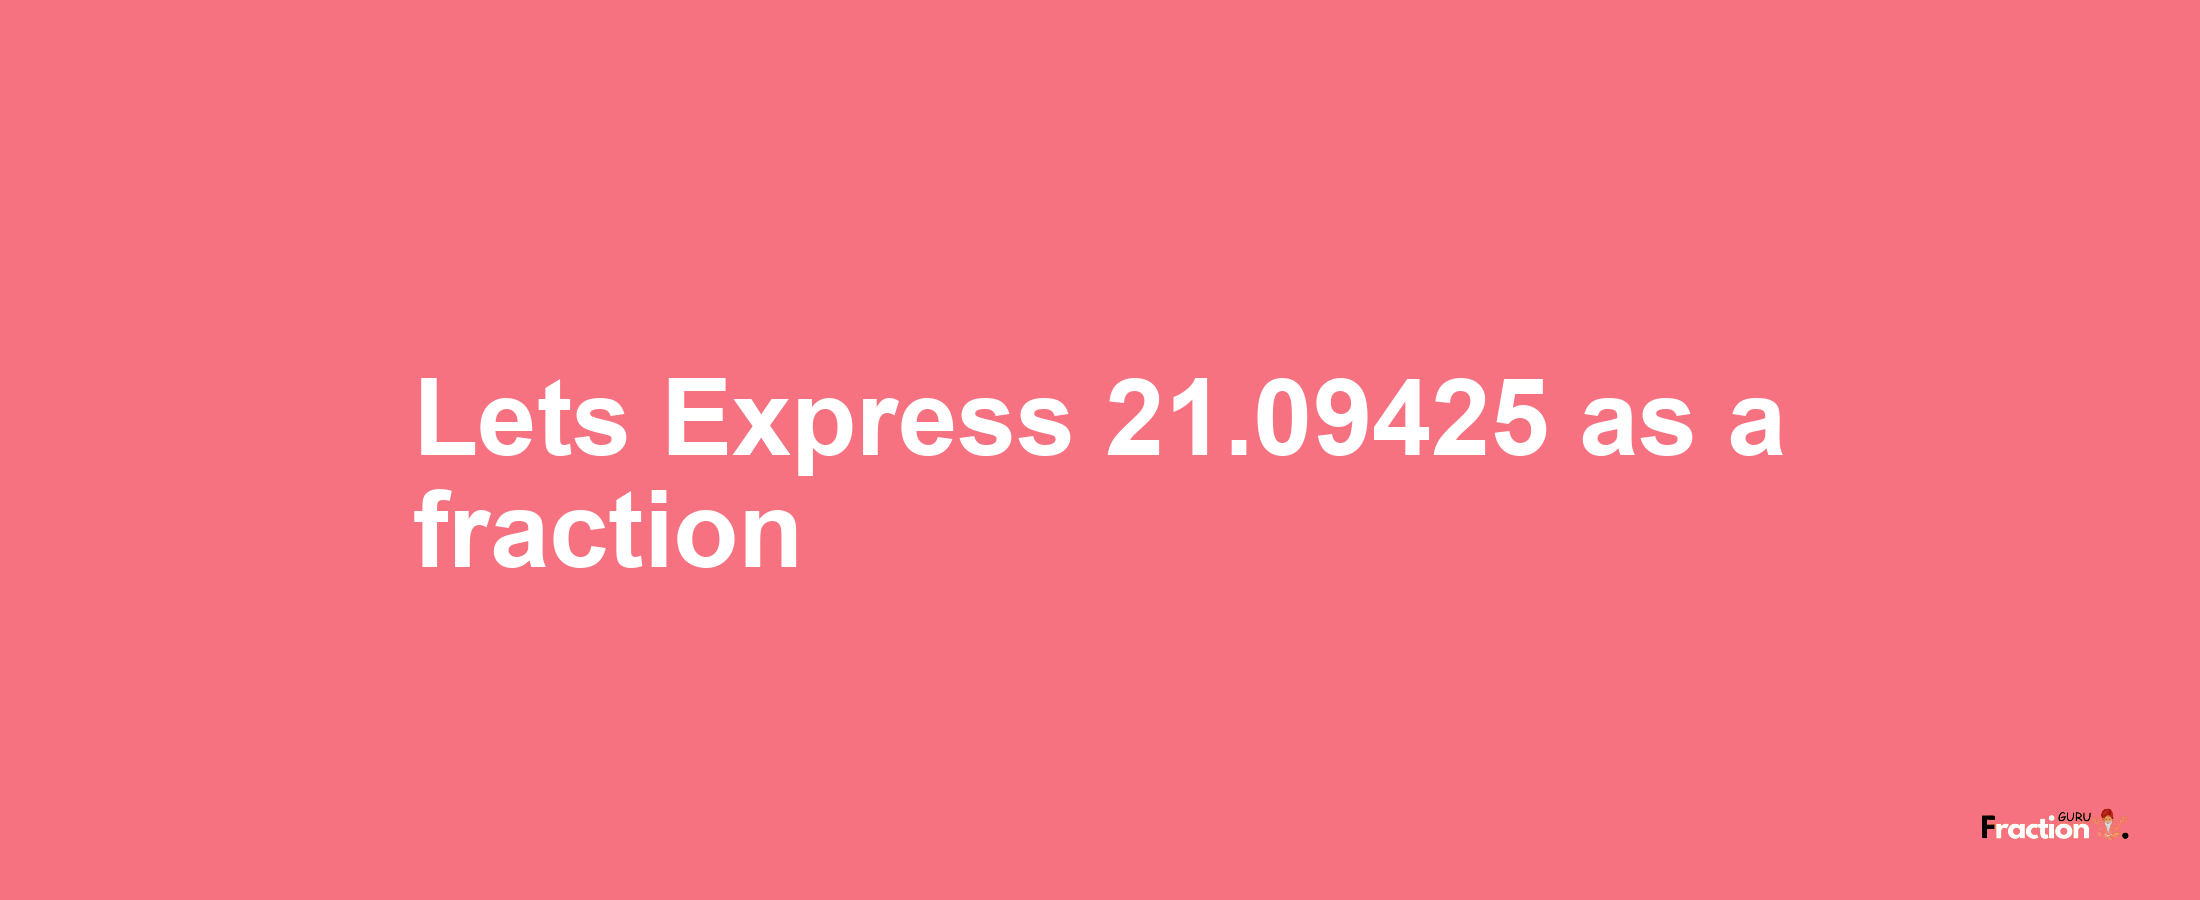 Lets Express 21.09425 as afraction